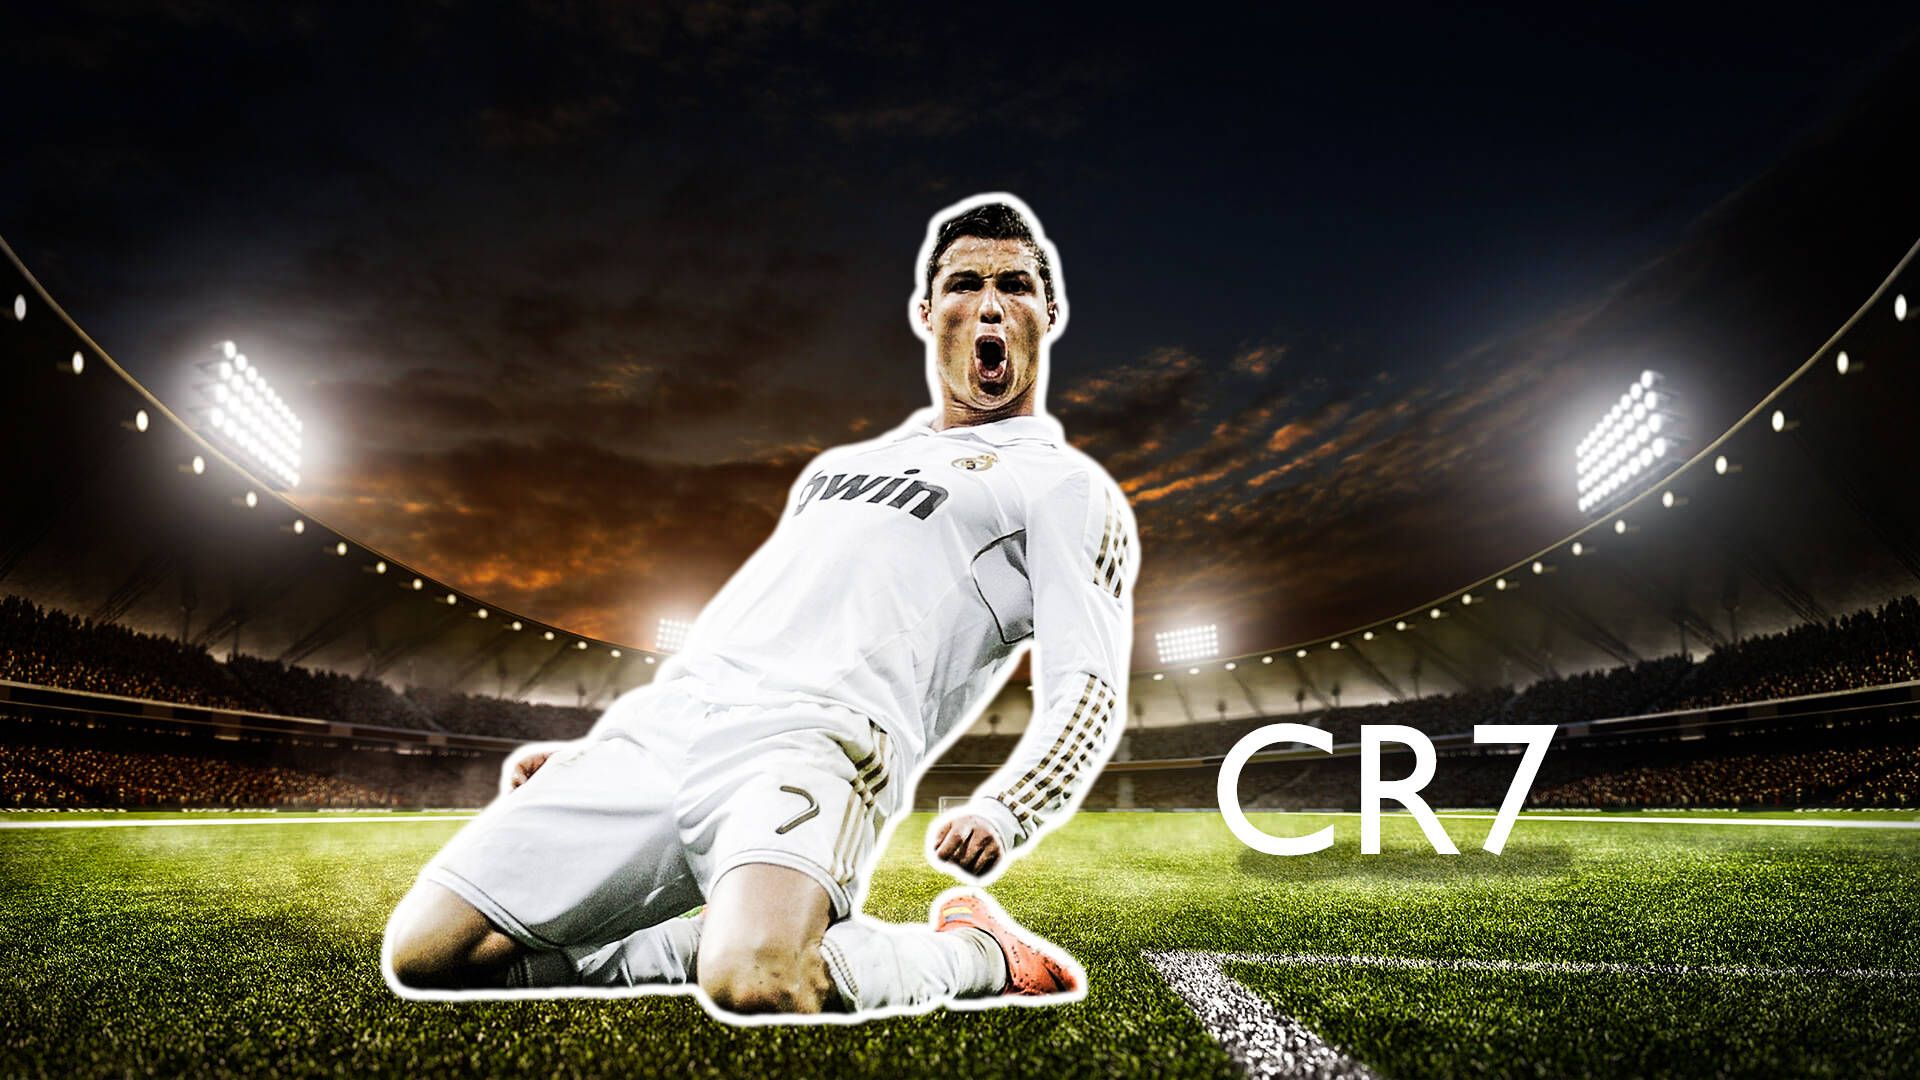 Download Soccer superstar Cristiano